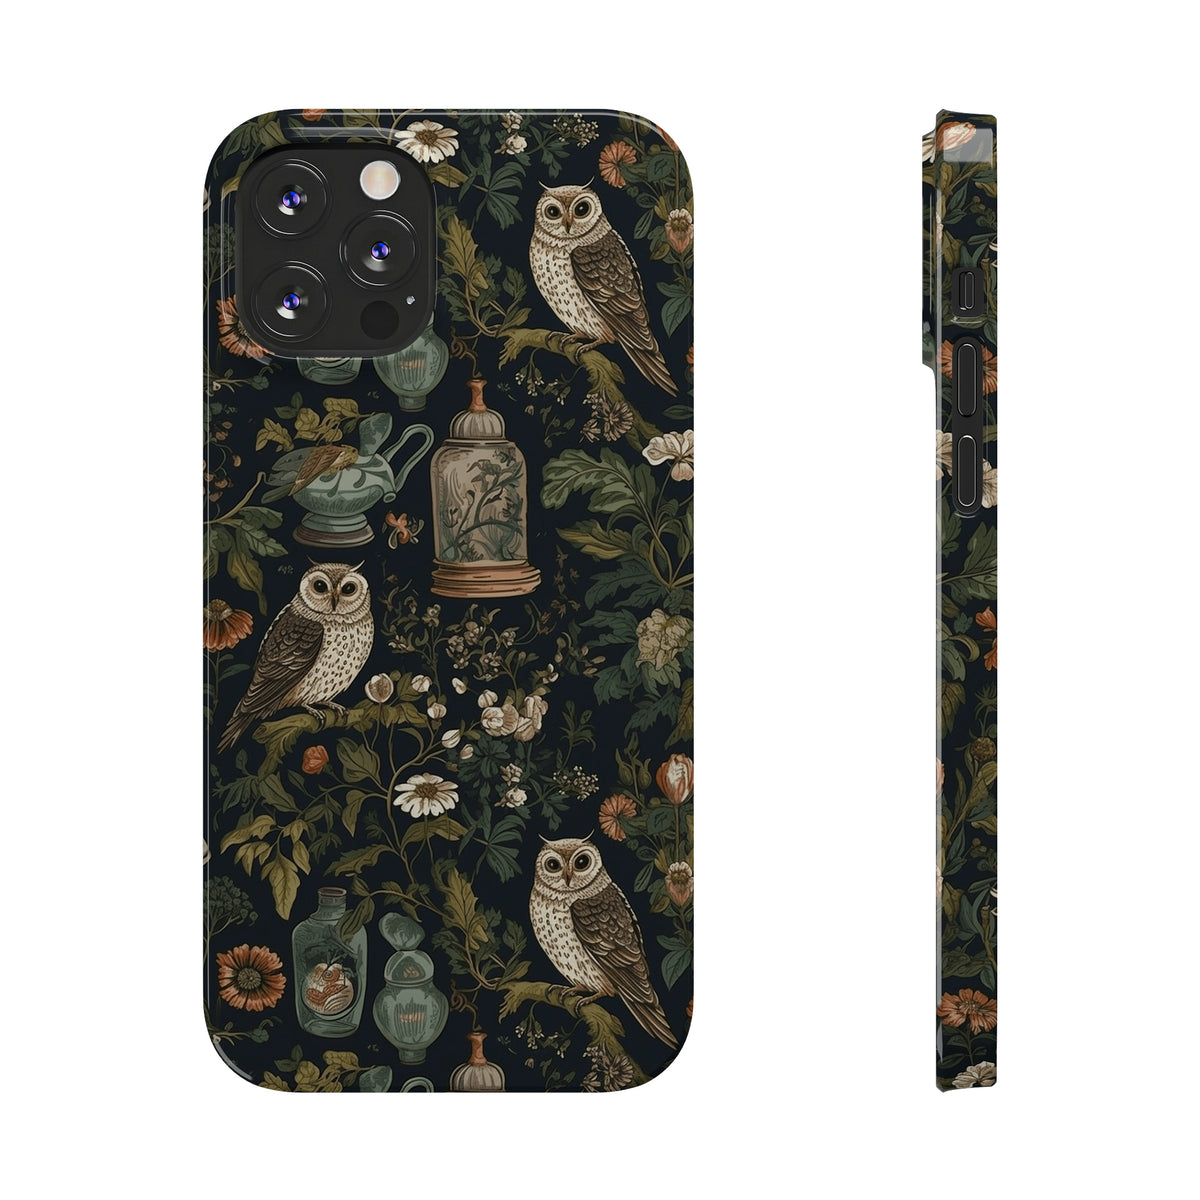 Magical Owl in Wizard Phone Case